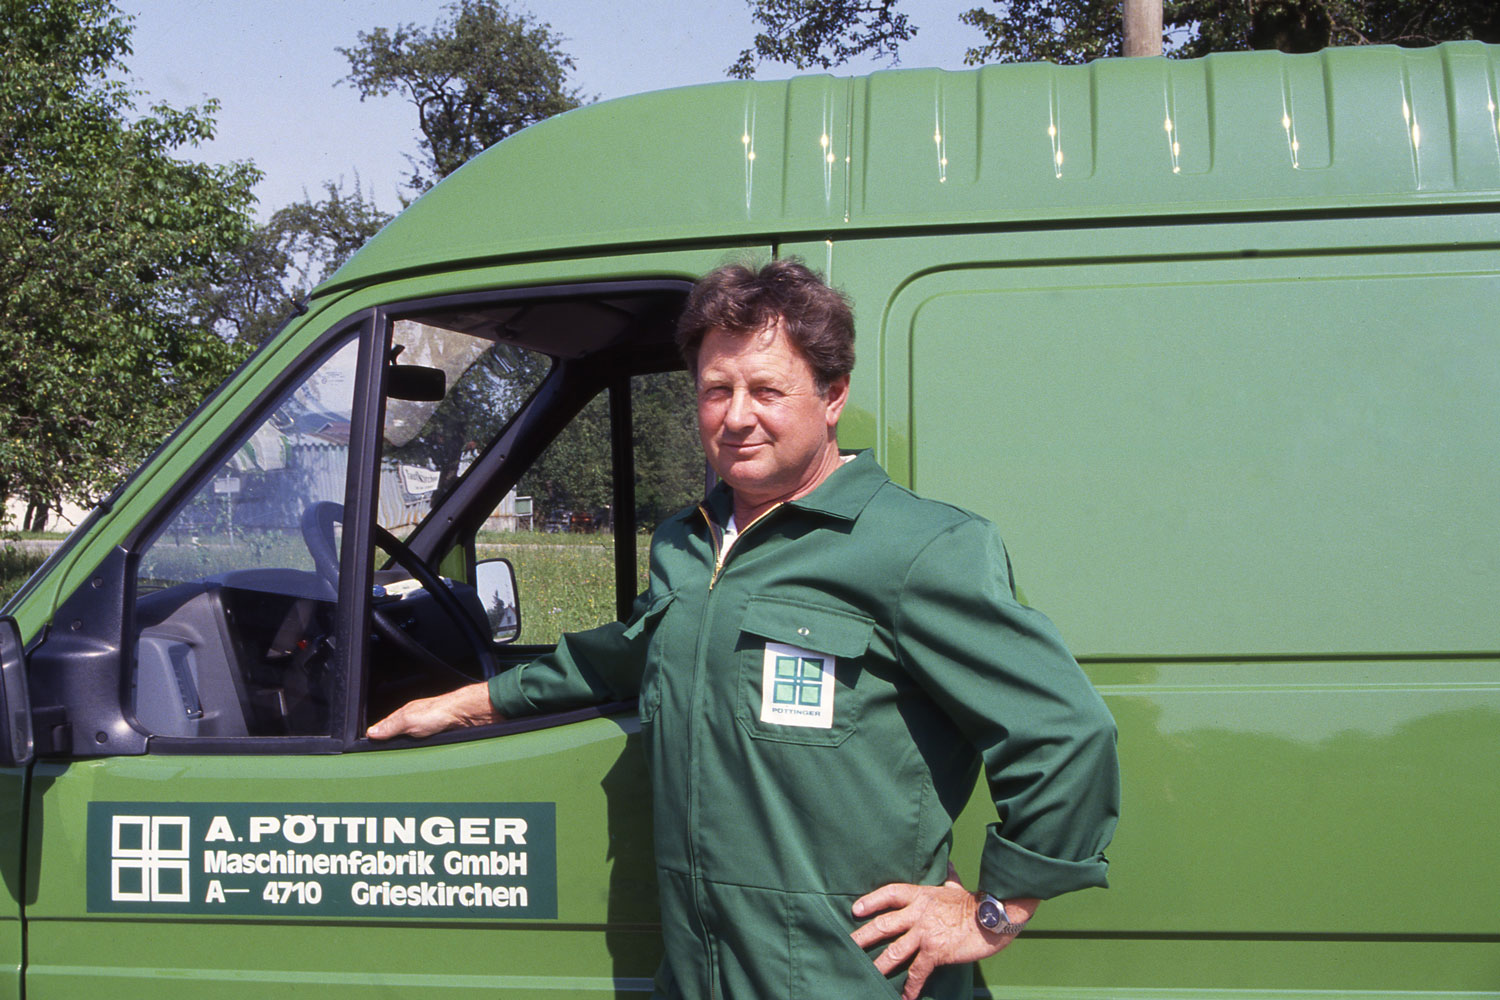 Go on green: PÖTTINGER customer services on the road.